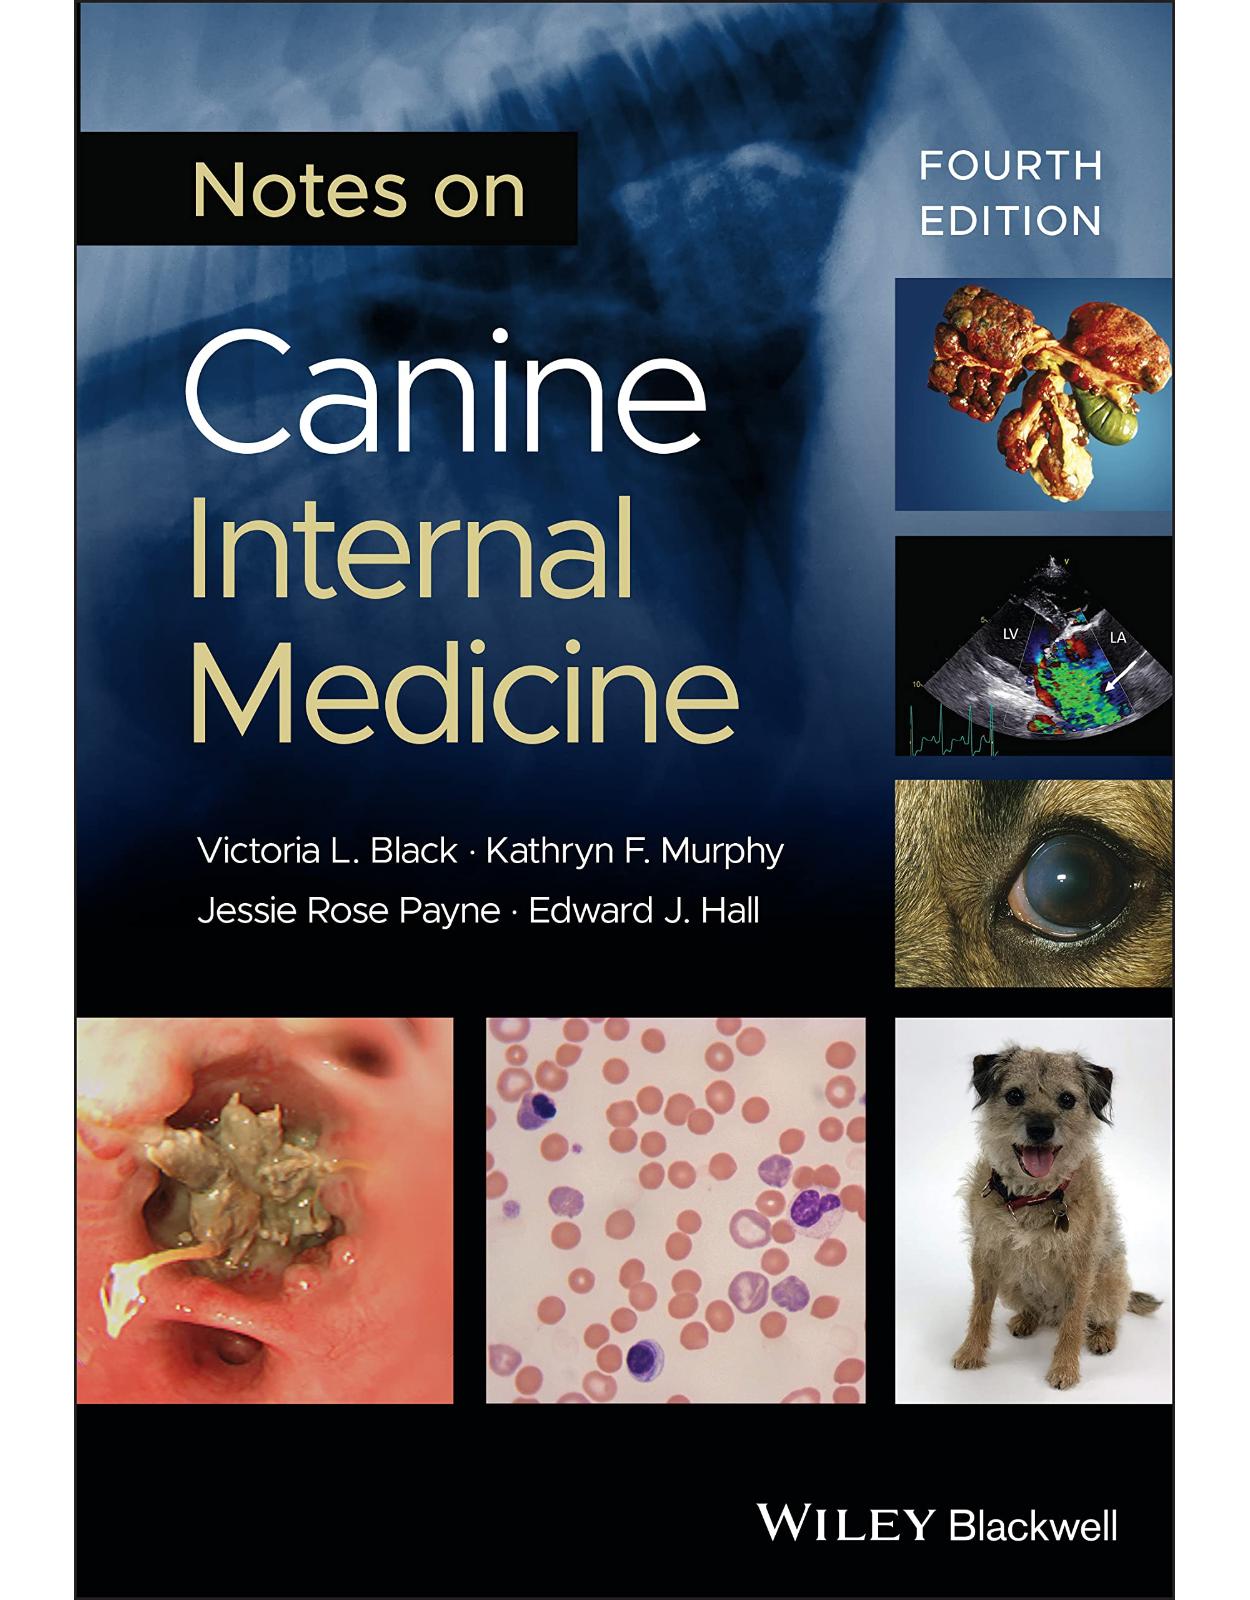 Notes on Canine Internal Medicine 4th Edition 